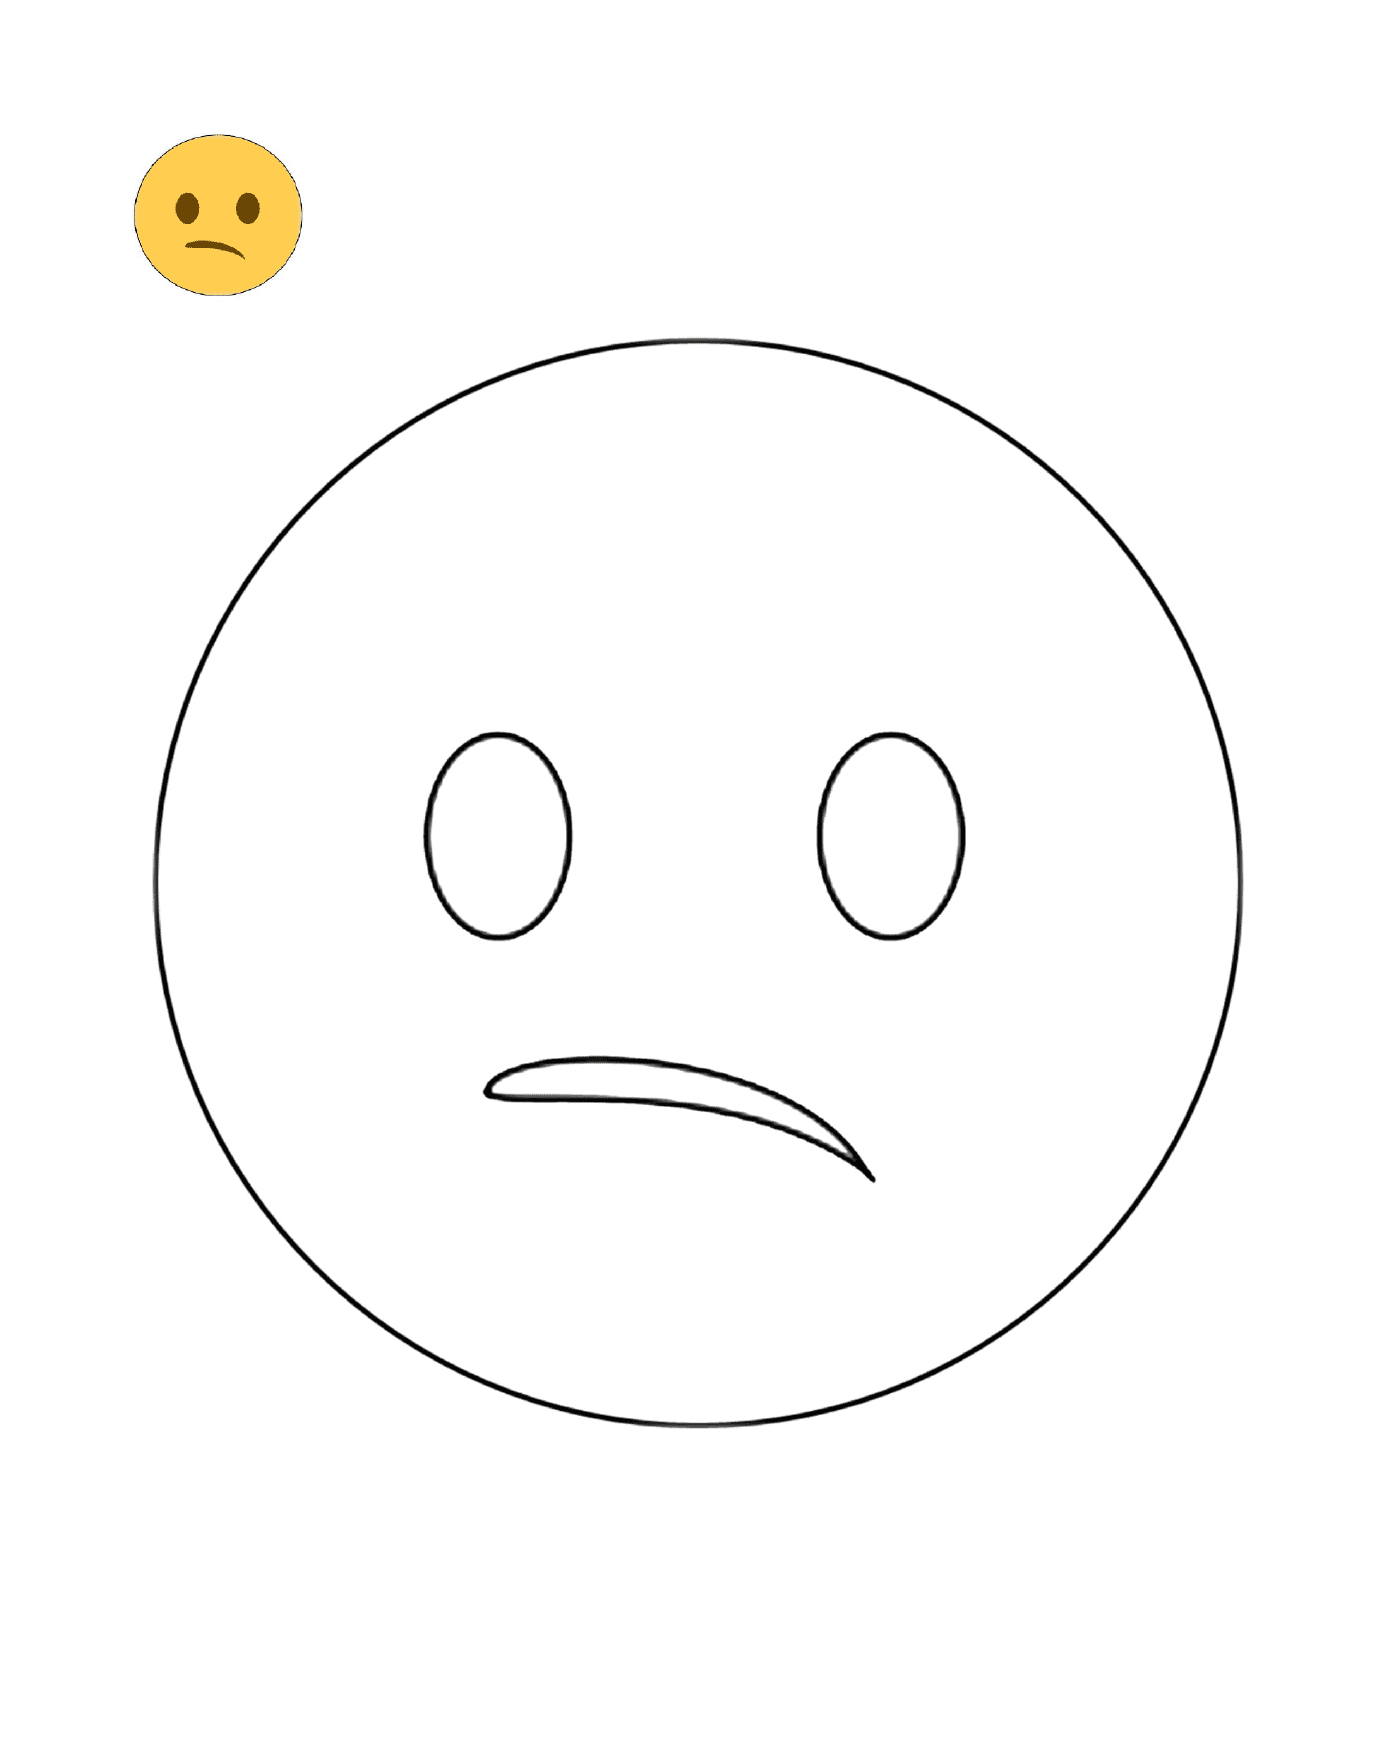  A sad face according to Twitter 